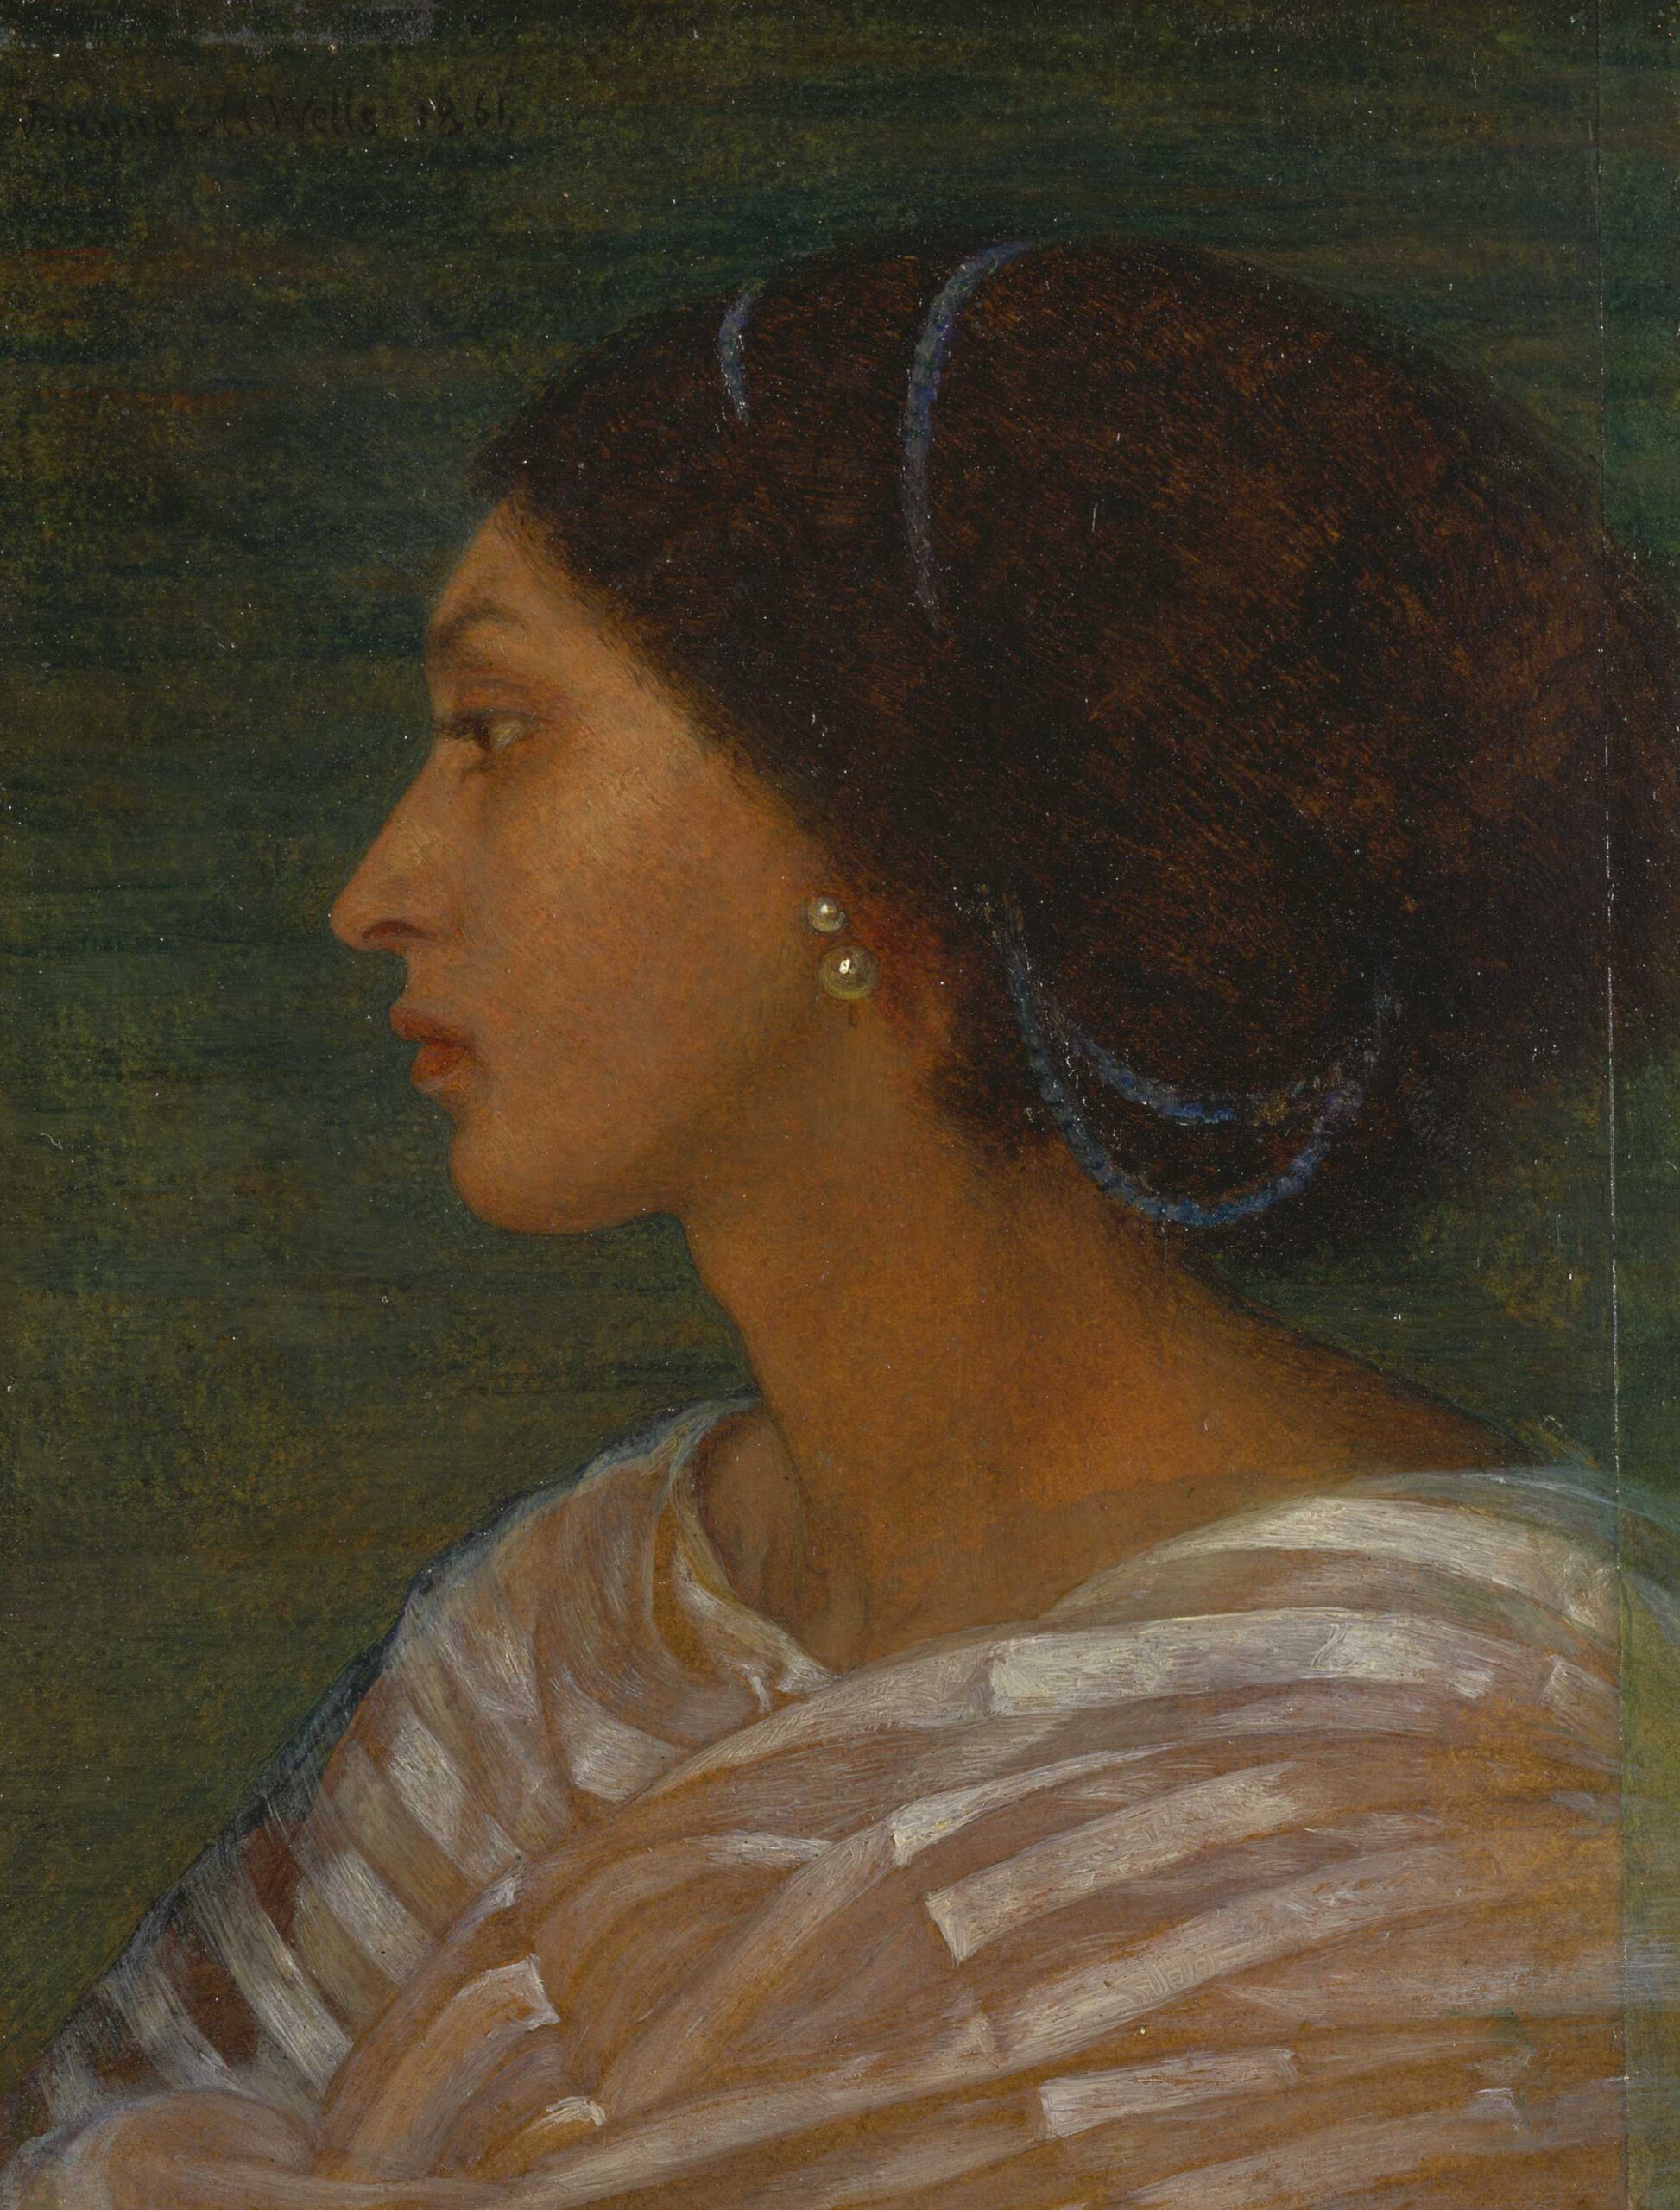 Joanna Boyce Wells (1831-1861), "Head of a Mulatto Woman (Mrs. Eaton)," 1861, oil on paper, laid on linen, 6 3/4 x 5 5/8 in., Yake Center for British Art, New Haven, Paul Mellon Fund, B1991.29